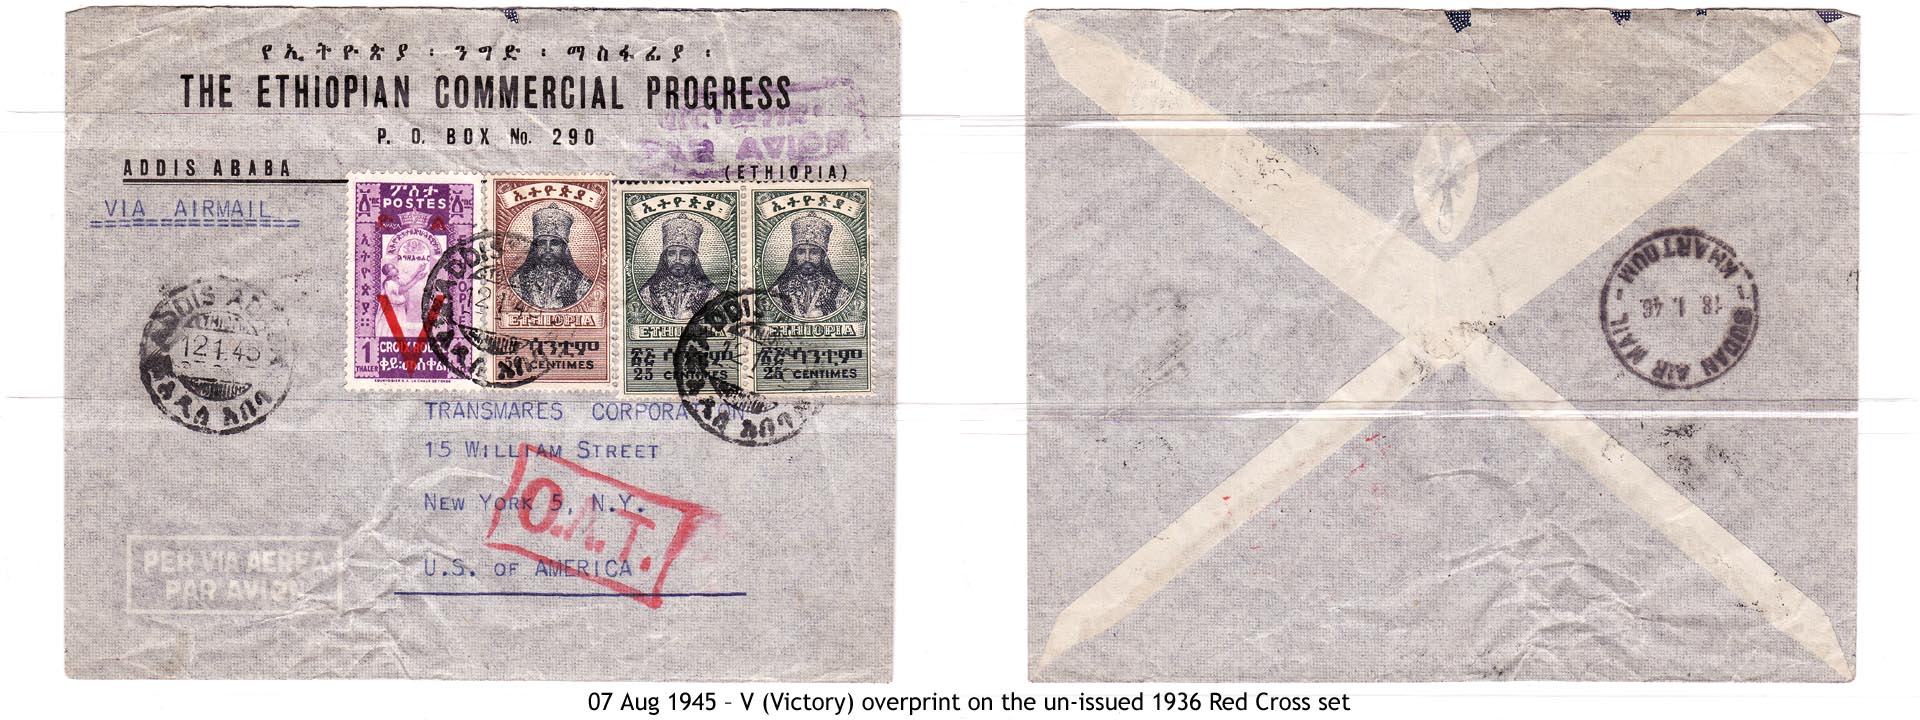 19450807 – V (Victory) overprint on the un-issued 1936 Red Cross set